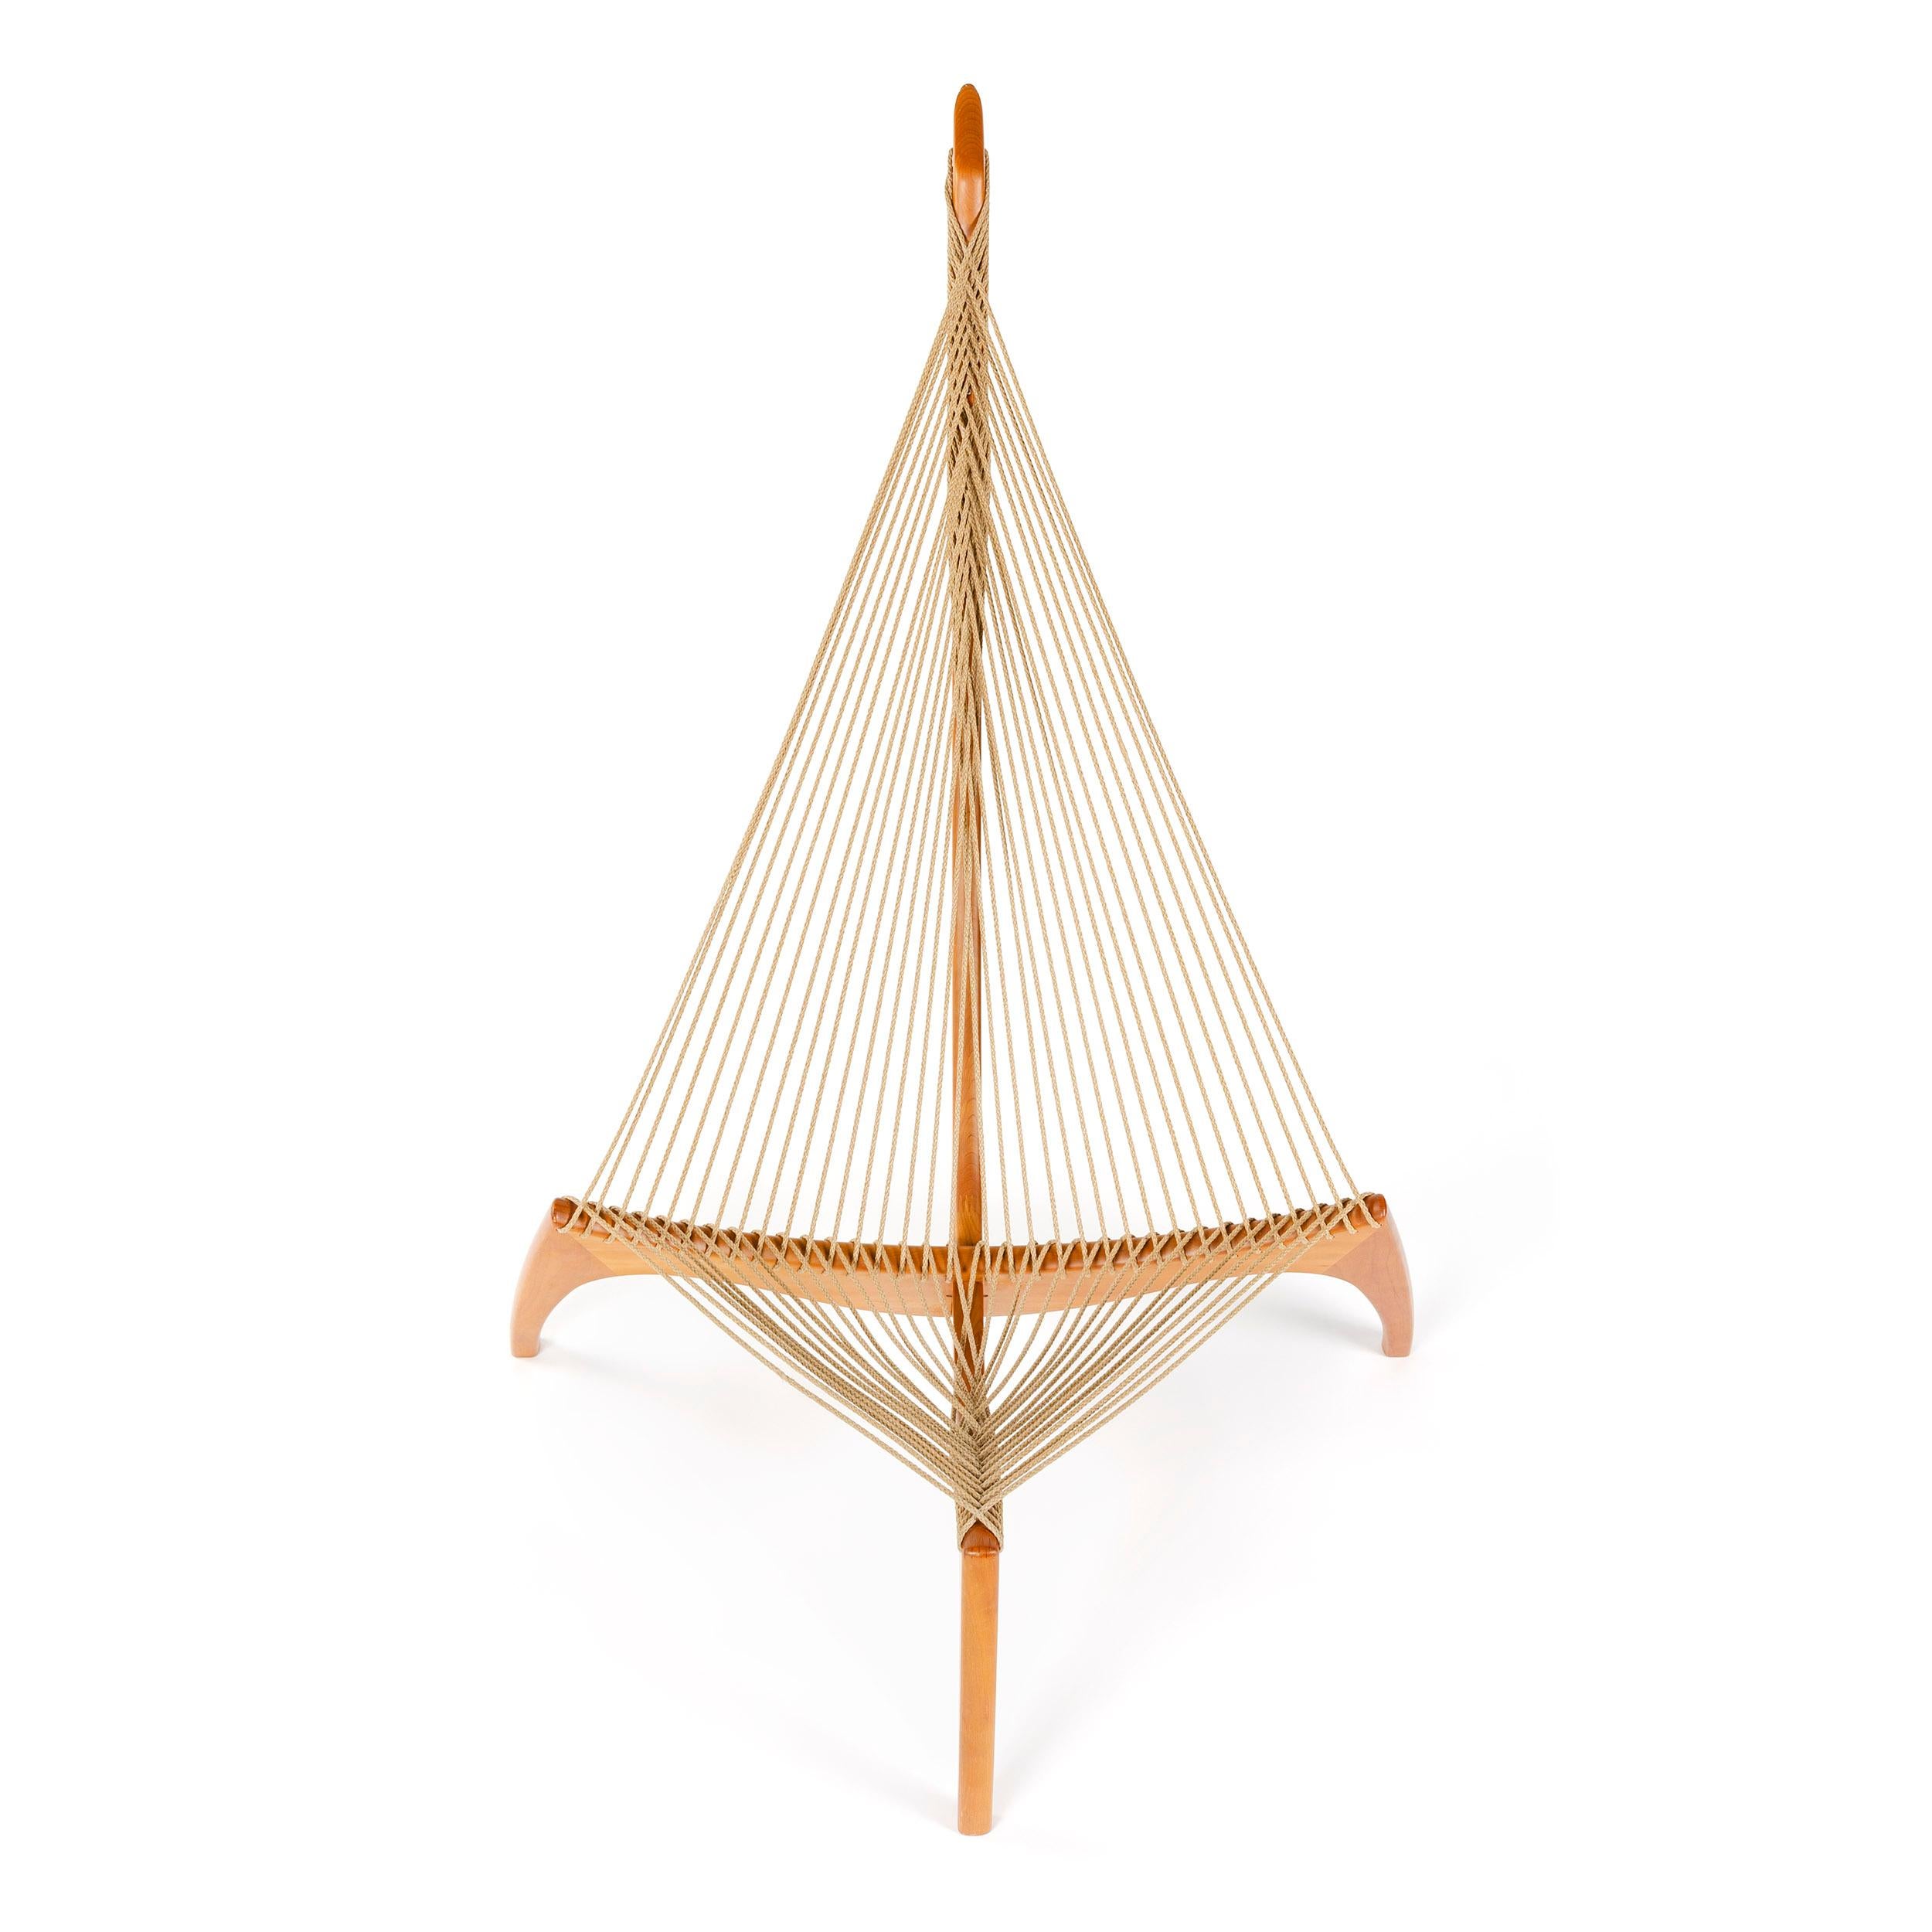 A cherrywood lounge chair designed by Jorgen Hovelskovs with woven hawser string for upholstery. Produced by Christensen and Larsen in Denmark in the 1960s.